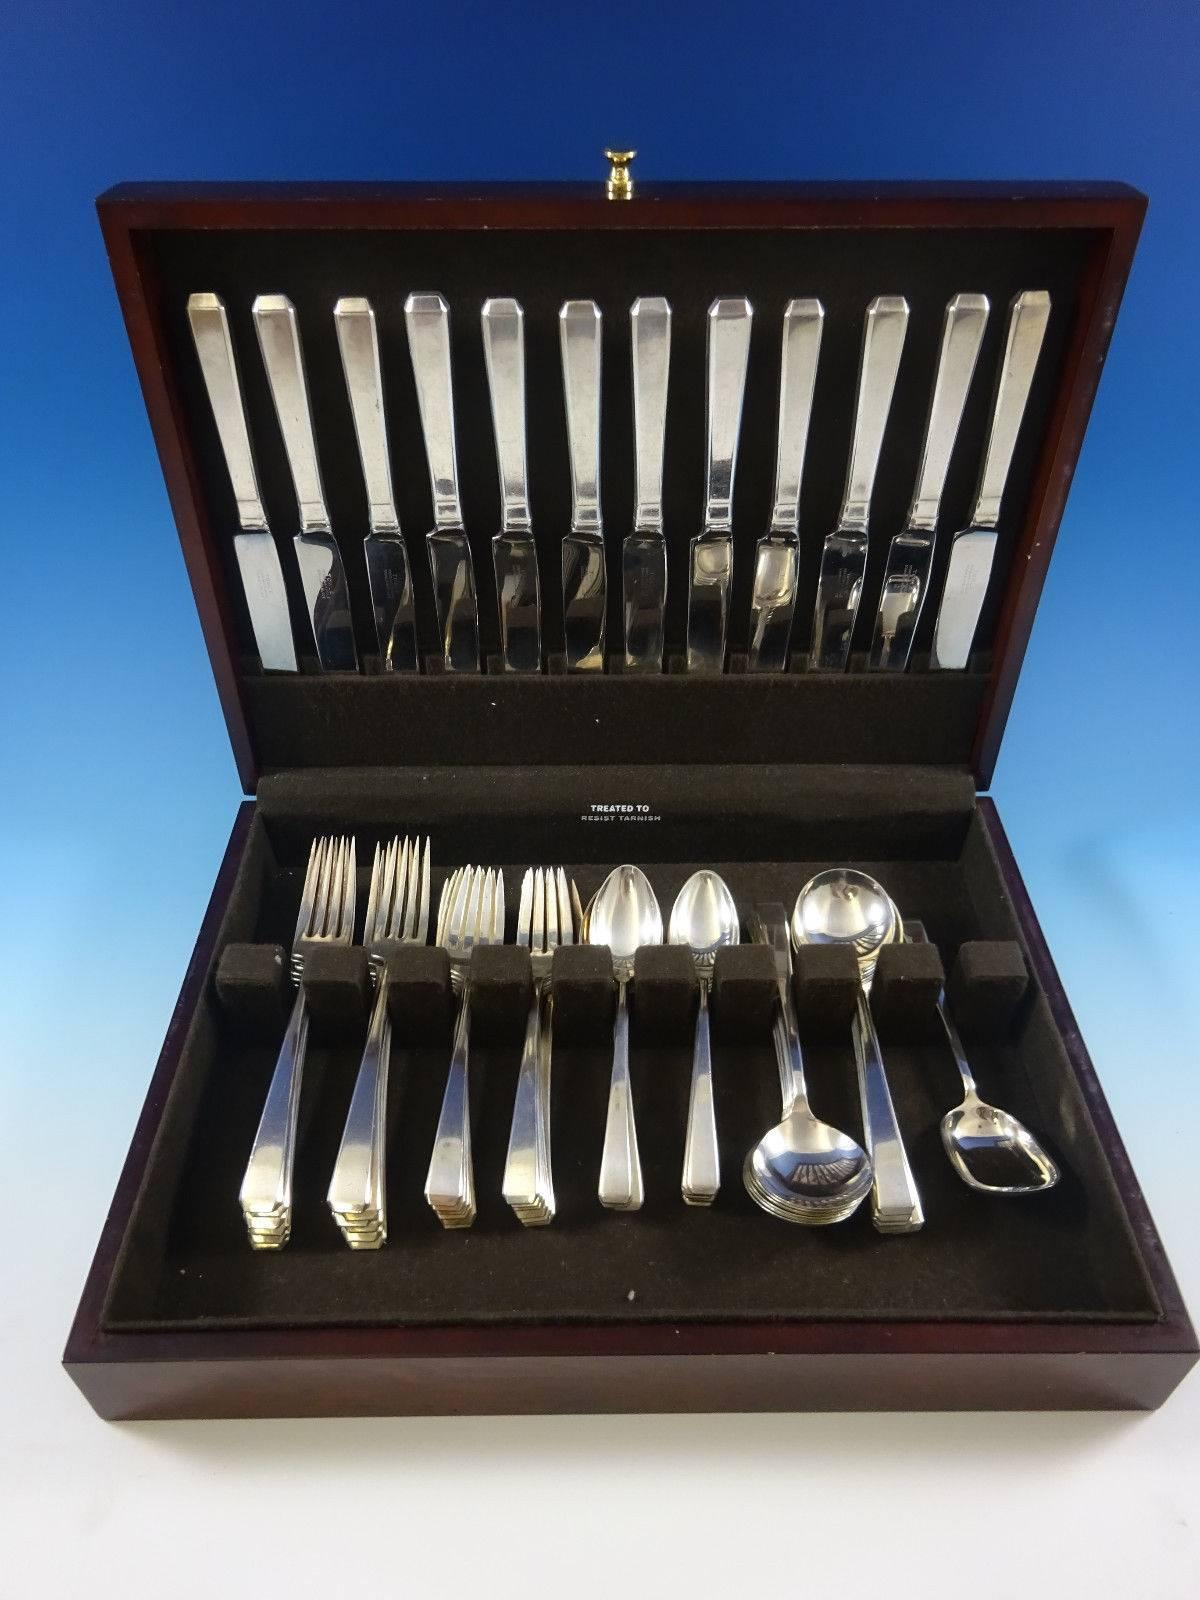 Craftsman by Towle sterling silver flatware set of 61 pieces. This set includes: 12 knives, 8 7/8